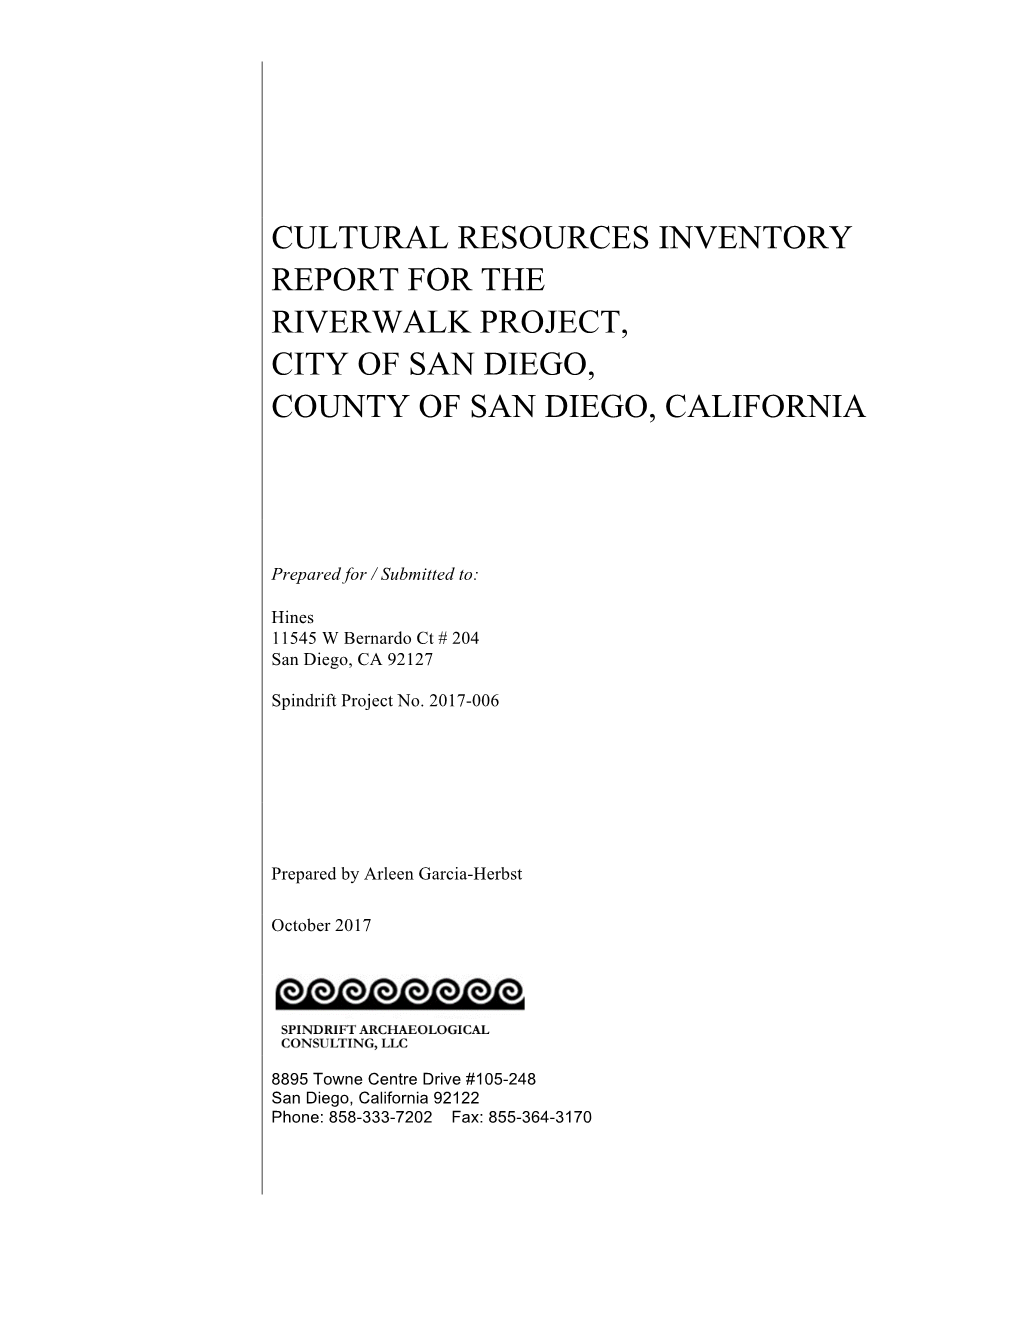 Cultural Resources Inventory Report for the Riverwalk Project, City of San Diego, County of San Diego, California